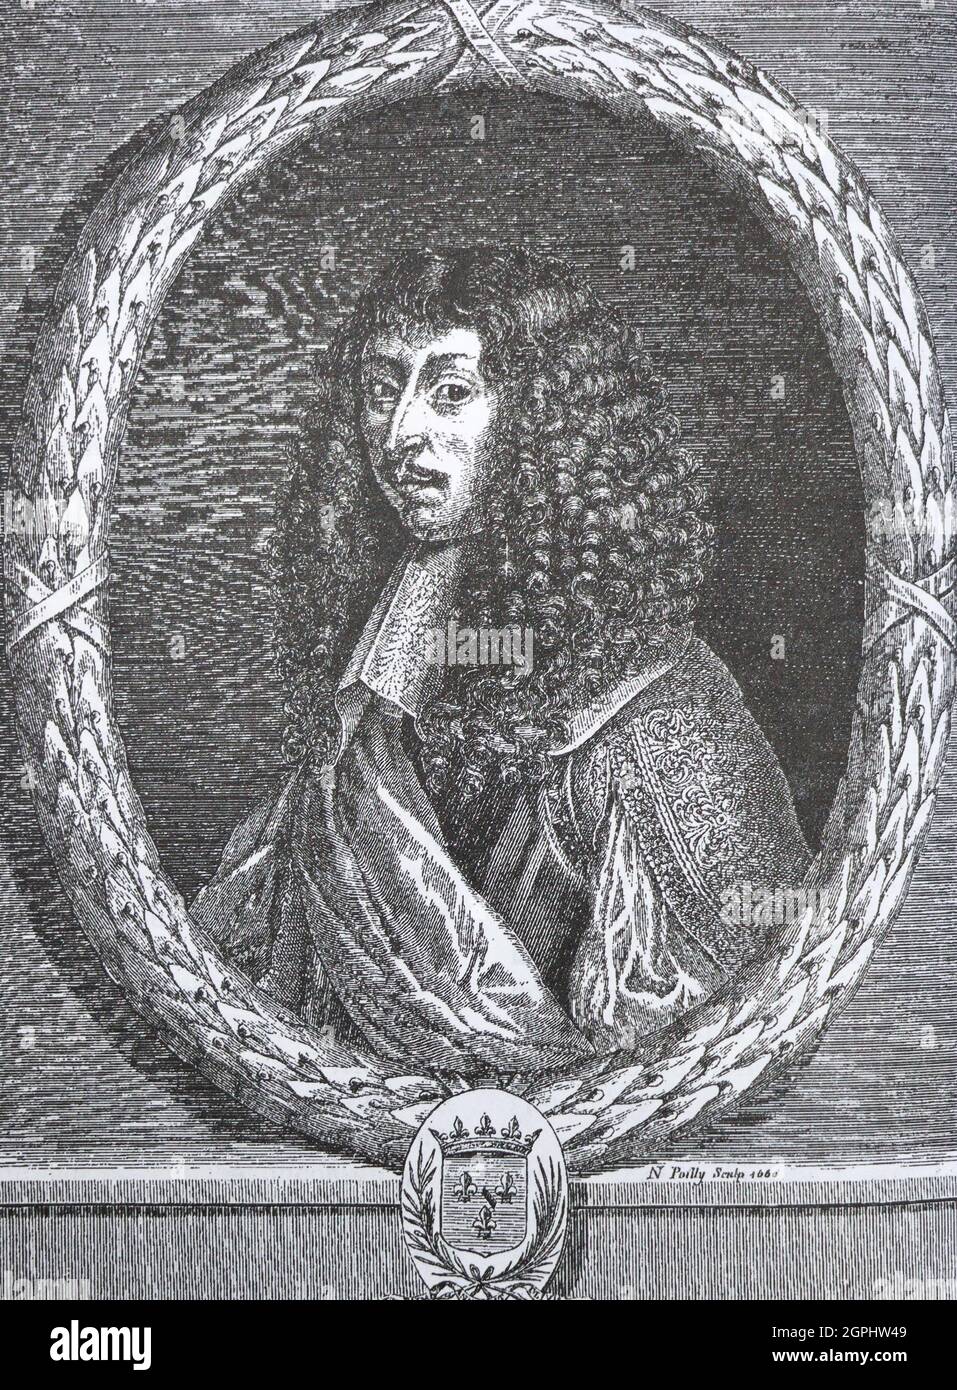 Louis de Bourbon, or Louis III, Prince of Condé (1668-1710), was a prince du sang as a member of the reigning House of Bourbon at the French court of Louis XIV. Styled as the Duke of Bourbon from birth, he succeeded his father as Prince of Condé in 1709; however, he was still known by the ducal title. He was prince for less than a year. Stock Photo